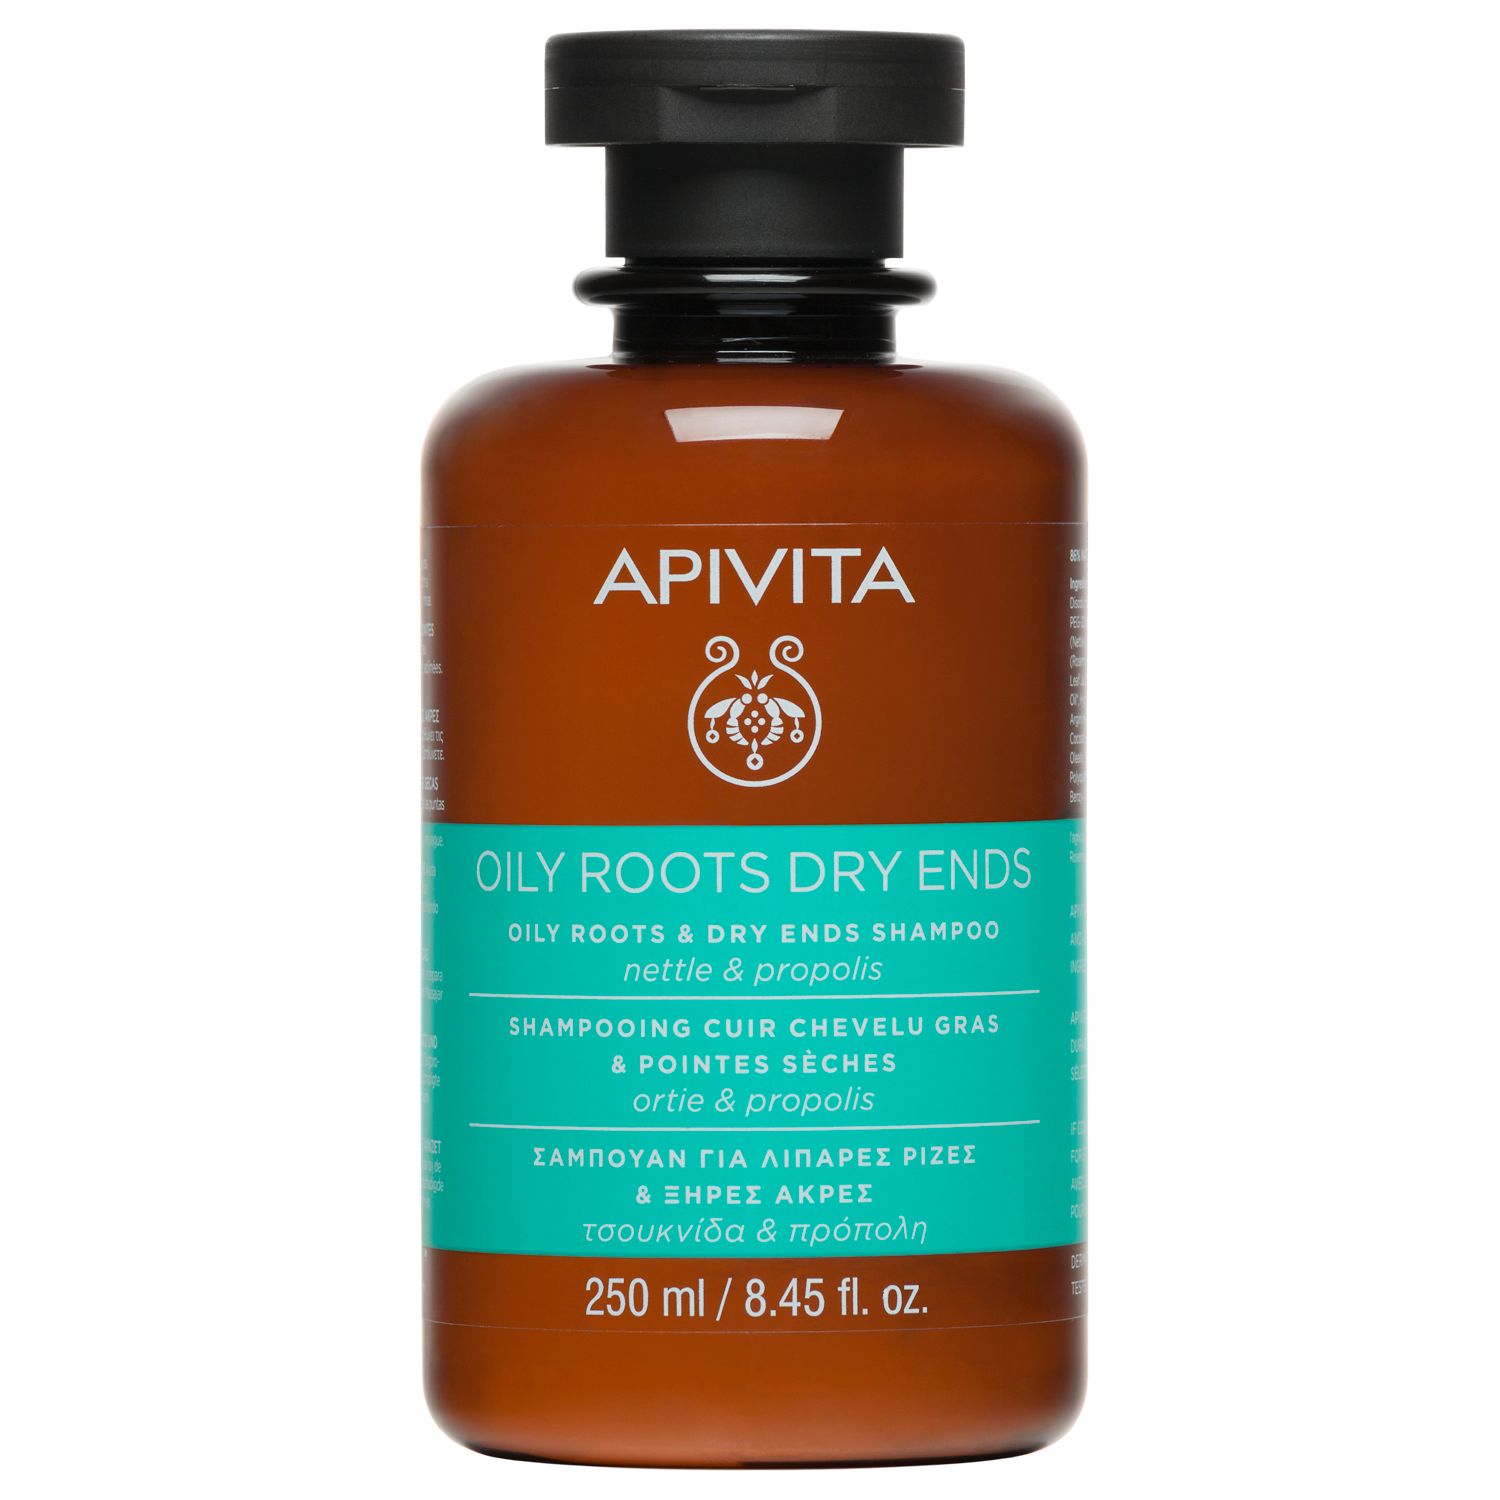 Image of APIVITA OILY ROOTS DRY ENDS Shampoo